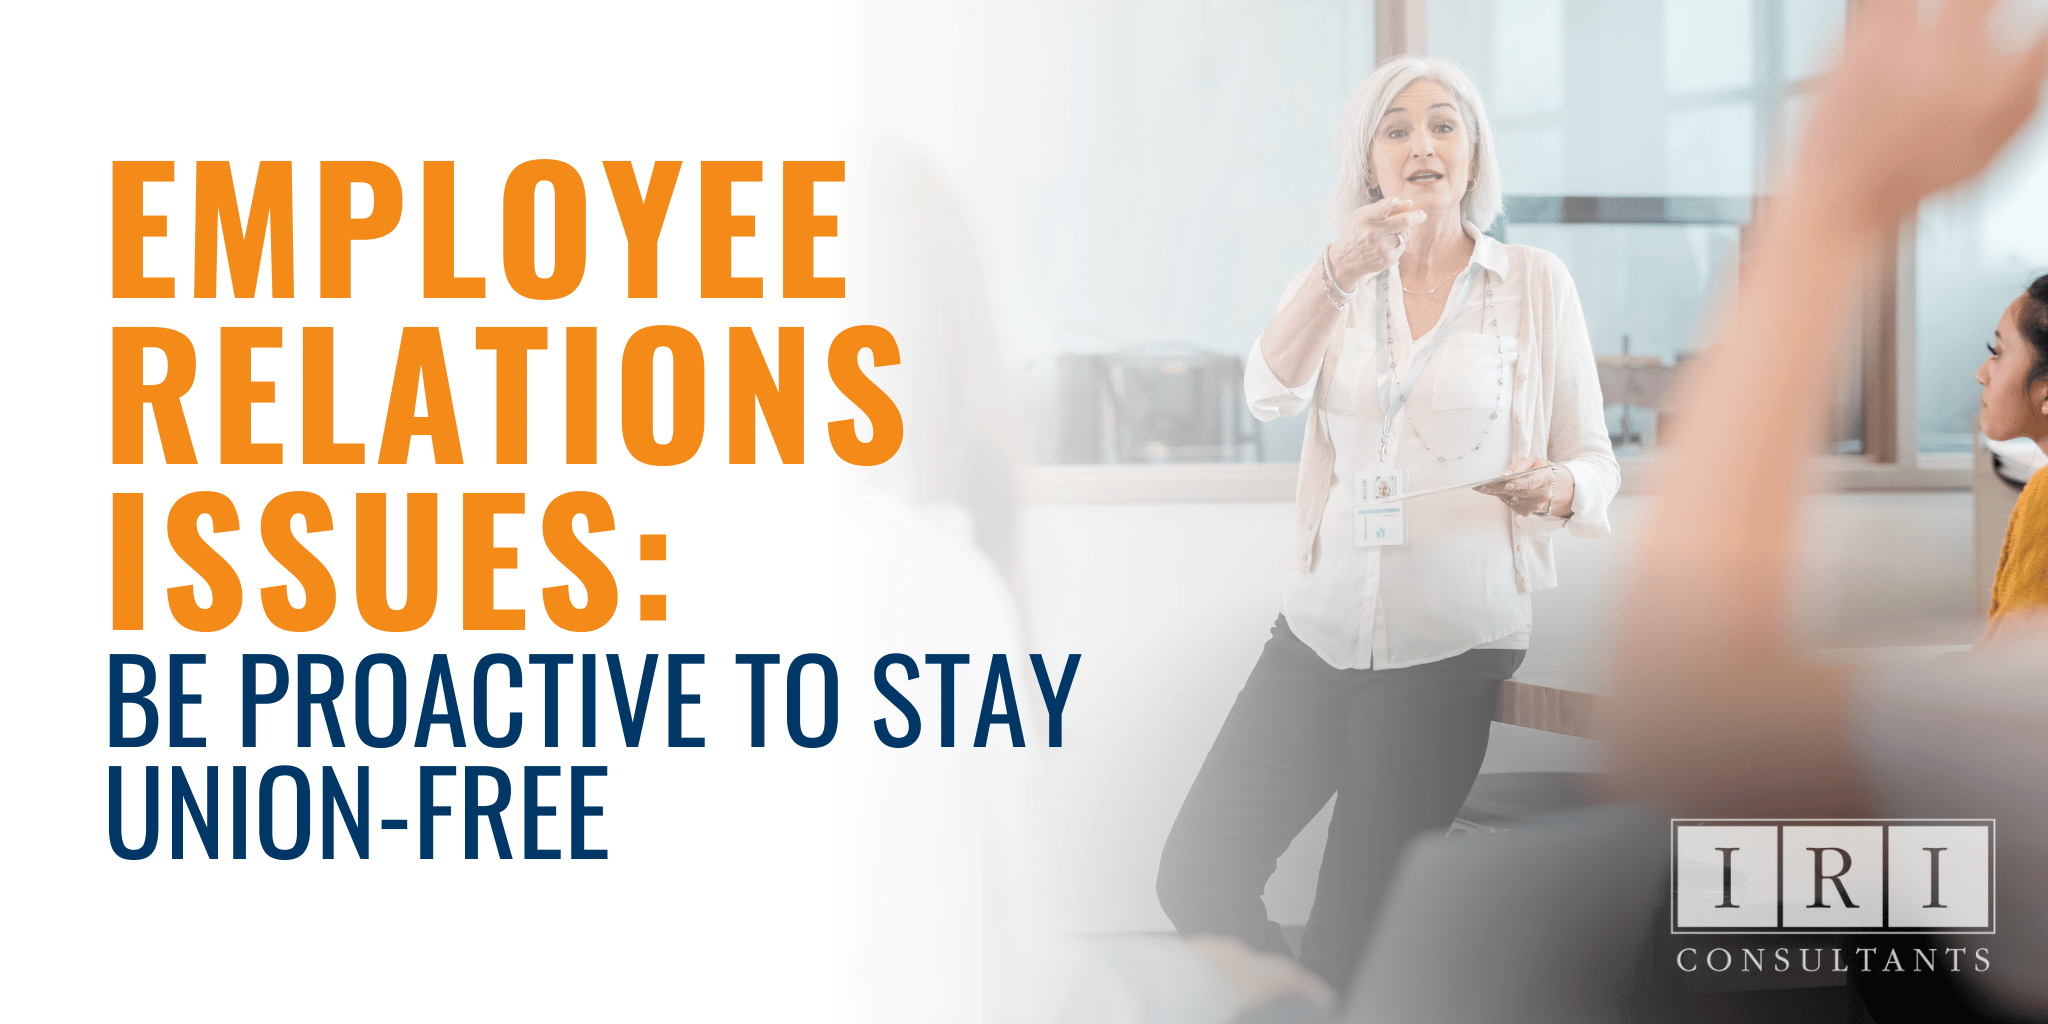 Employee Relations Issues Be Proactive To Stay Union-Free